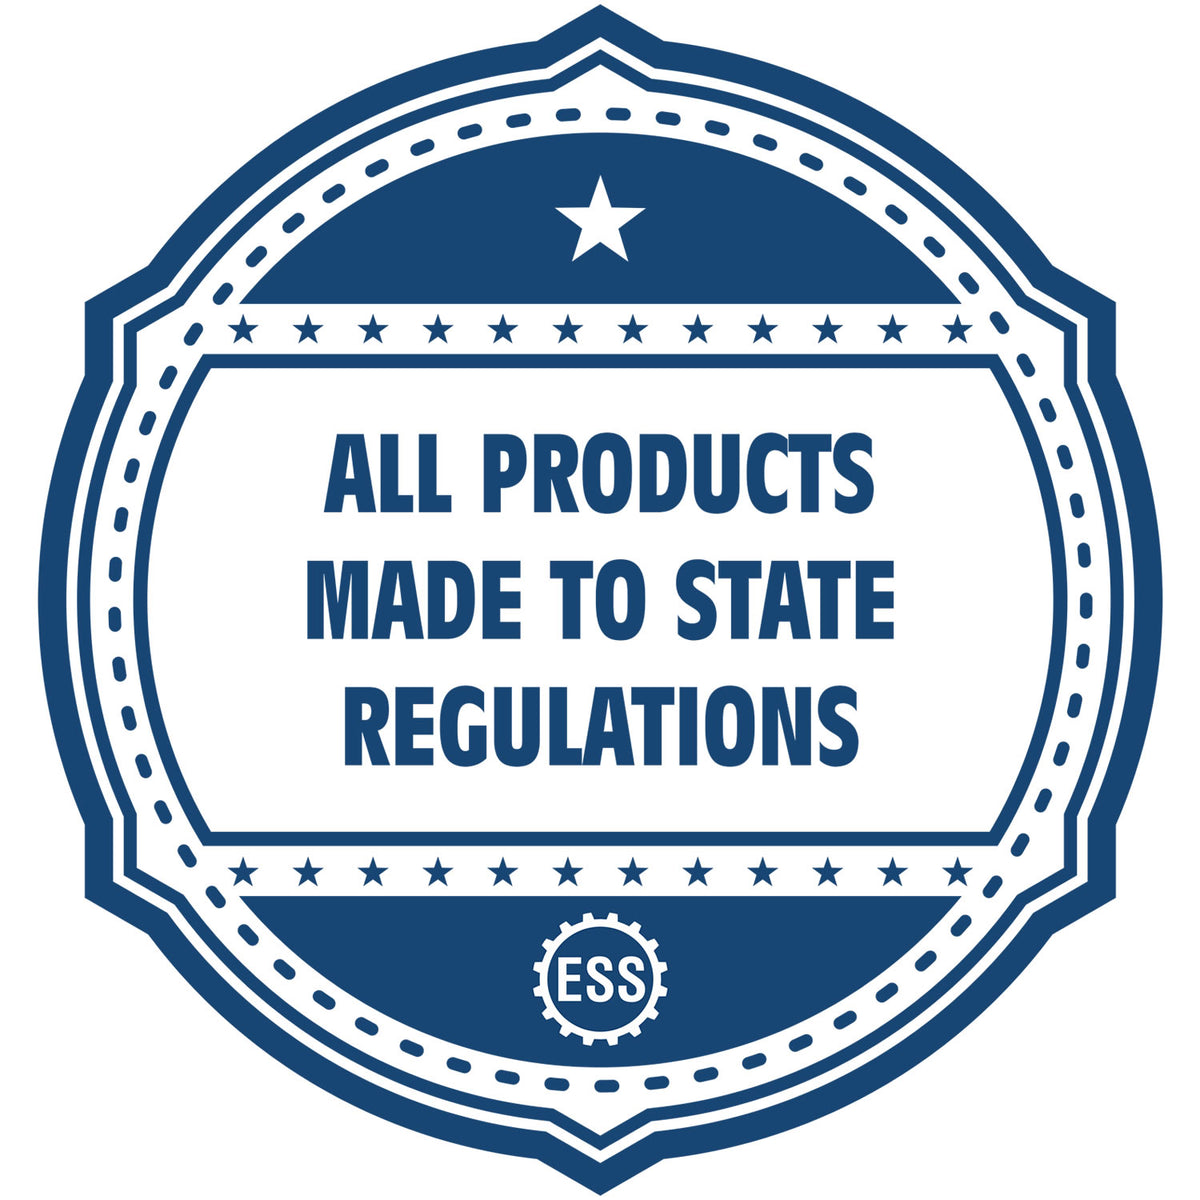 An icon or badge element for the Soft Maryland Professional Engineer Seal showing that this product is made in compliance with state regulations.